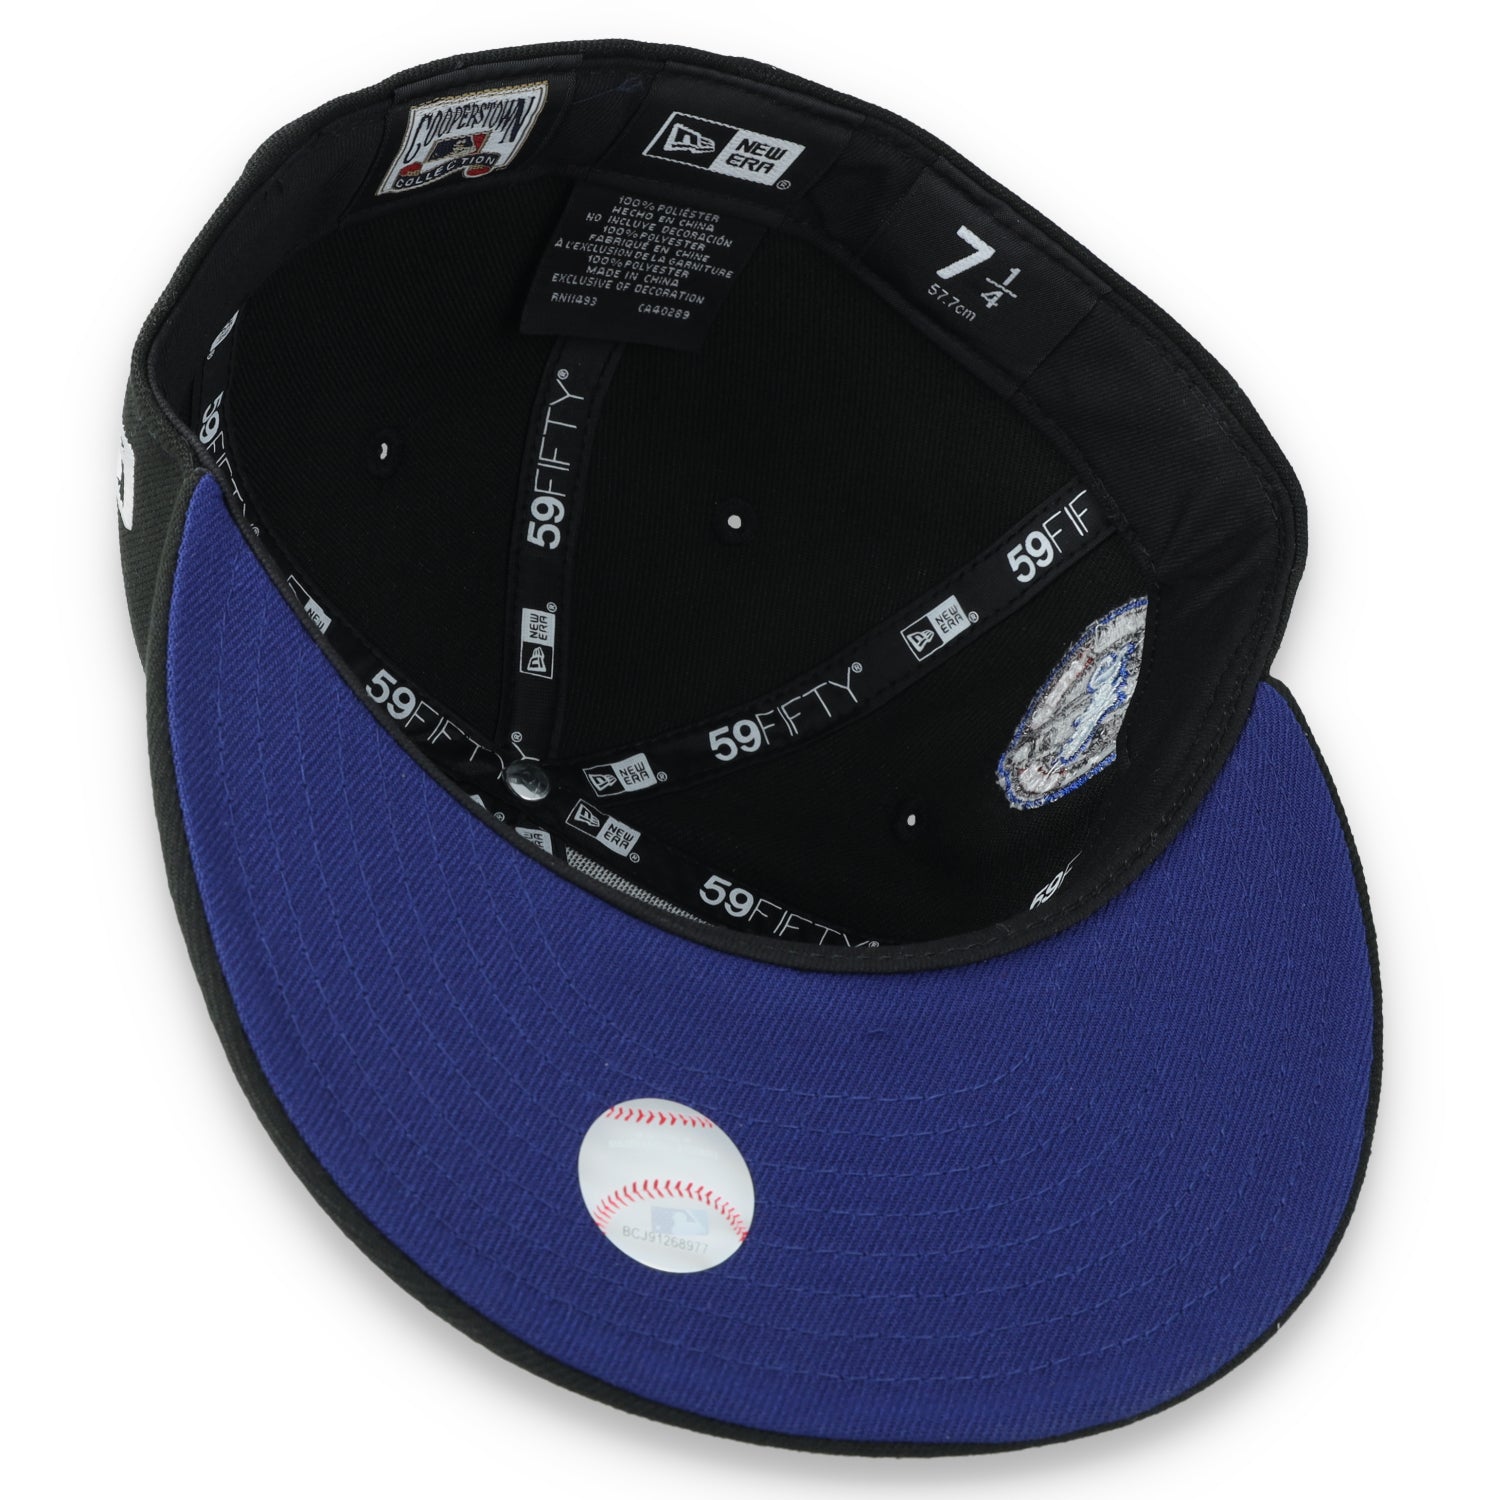 New Era Los Angeles Dodgers 60th Anniversary Side Patch 59FIFTY Fitted Hat-Metallic Grey/Black